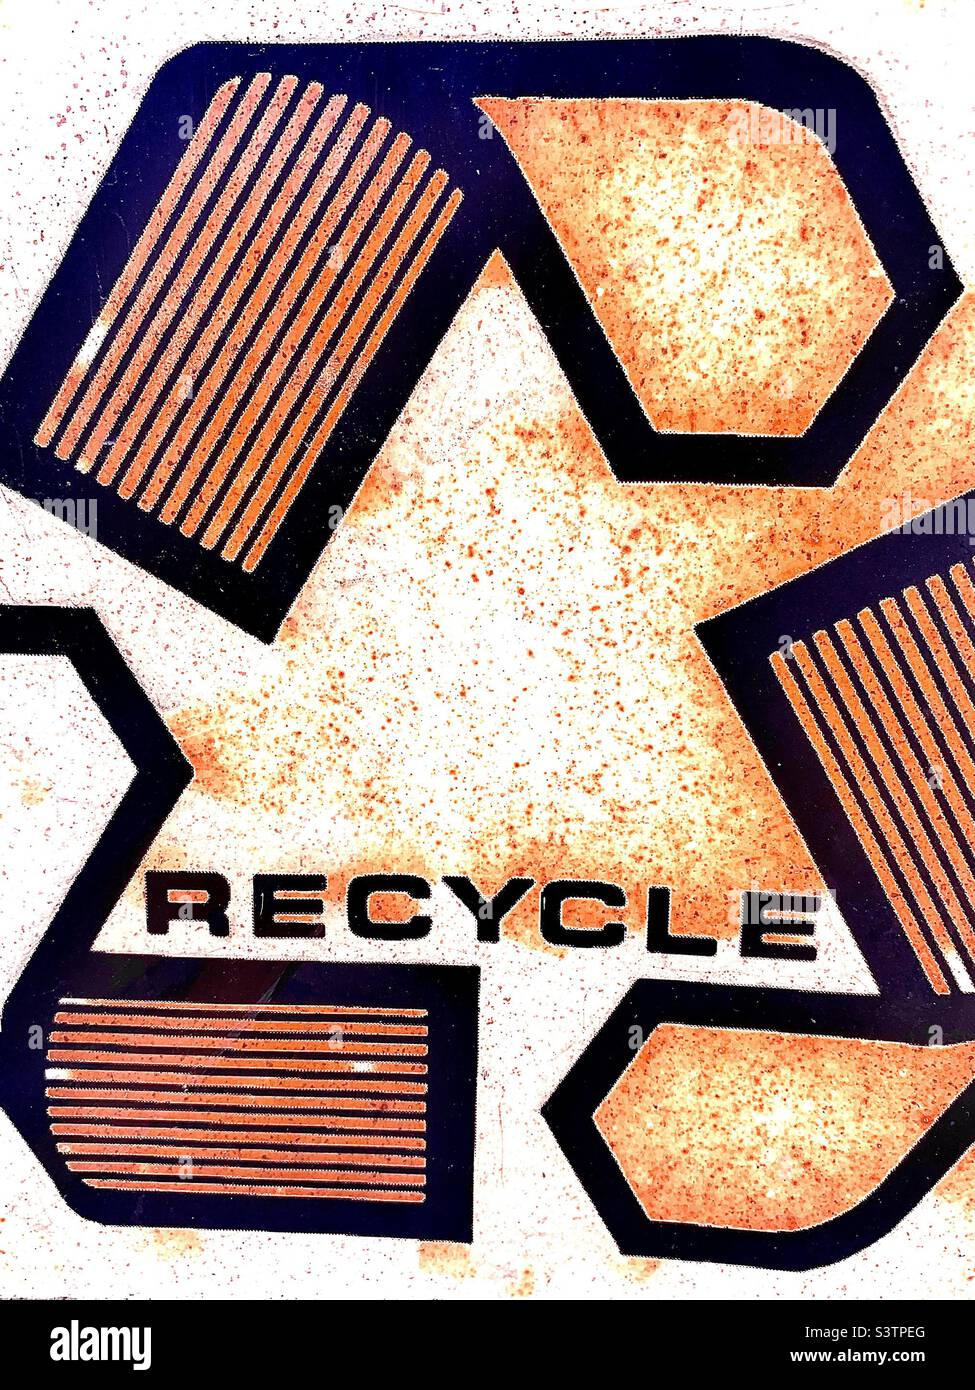 Recycle symbol with word RECYCLE Stock Photo